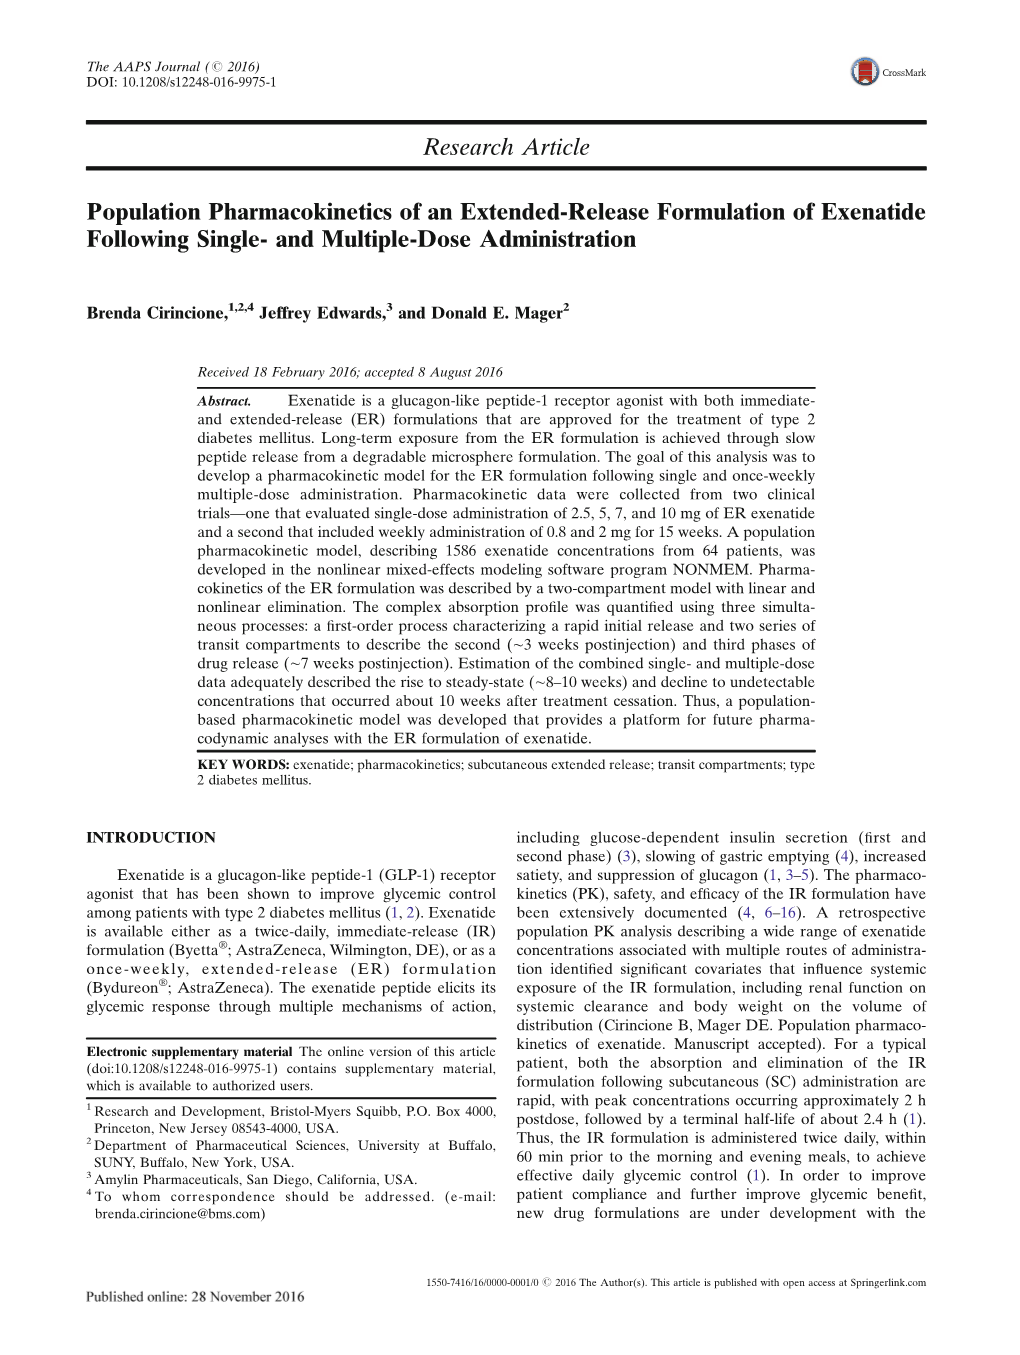 Population Pharmacokinetics of an Extended-Release Formulation of Exenatide Following Single- and Multiple-Dose Administration